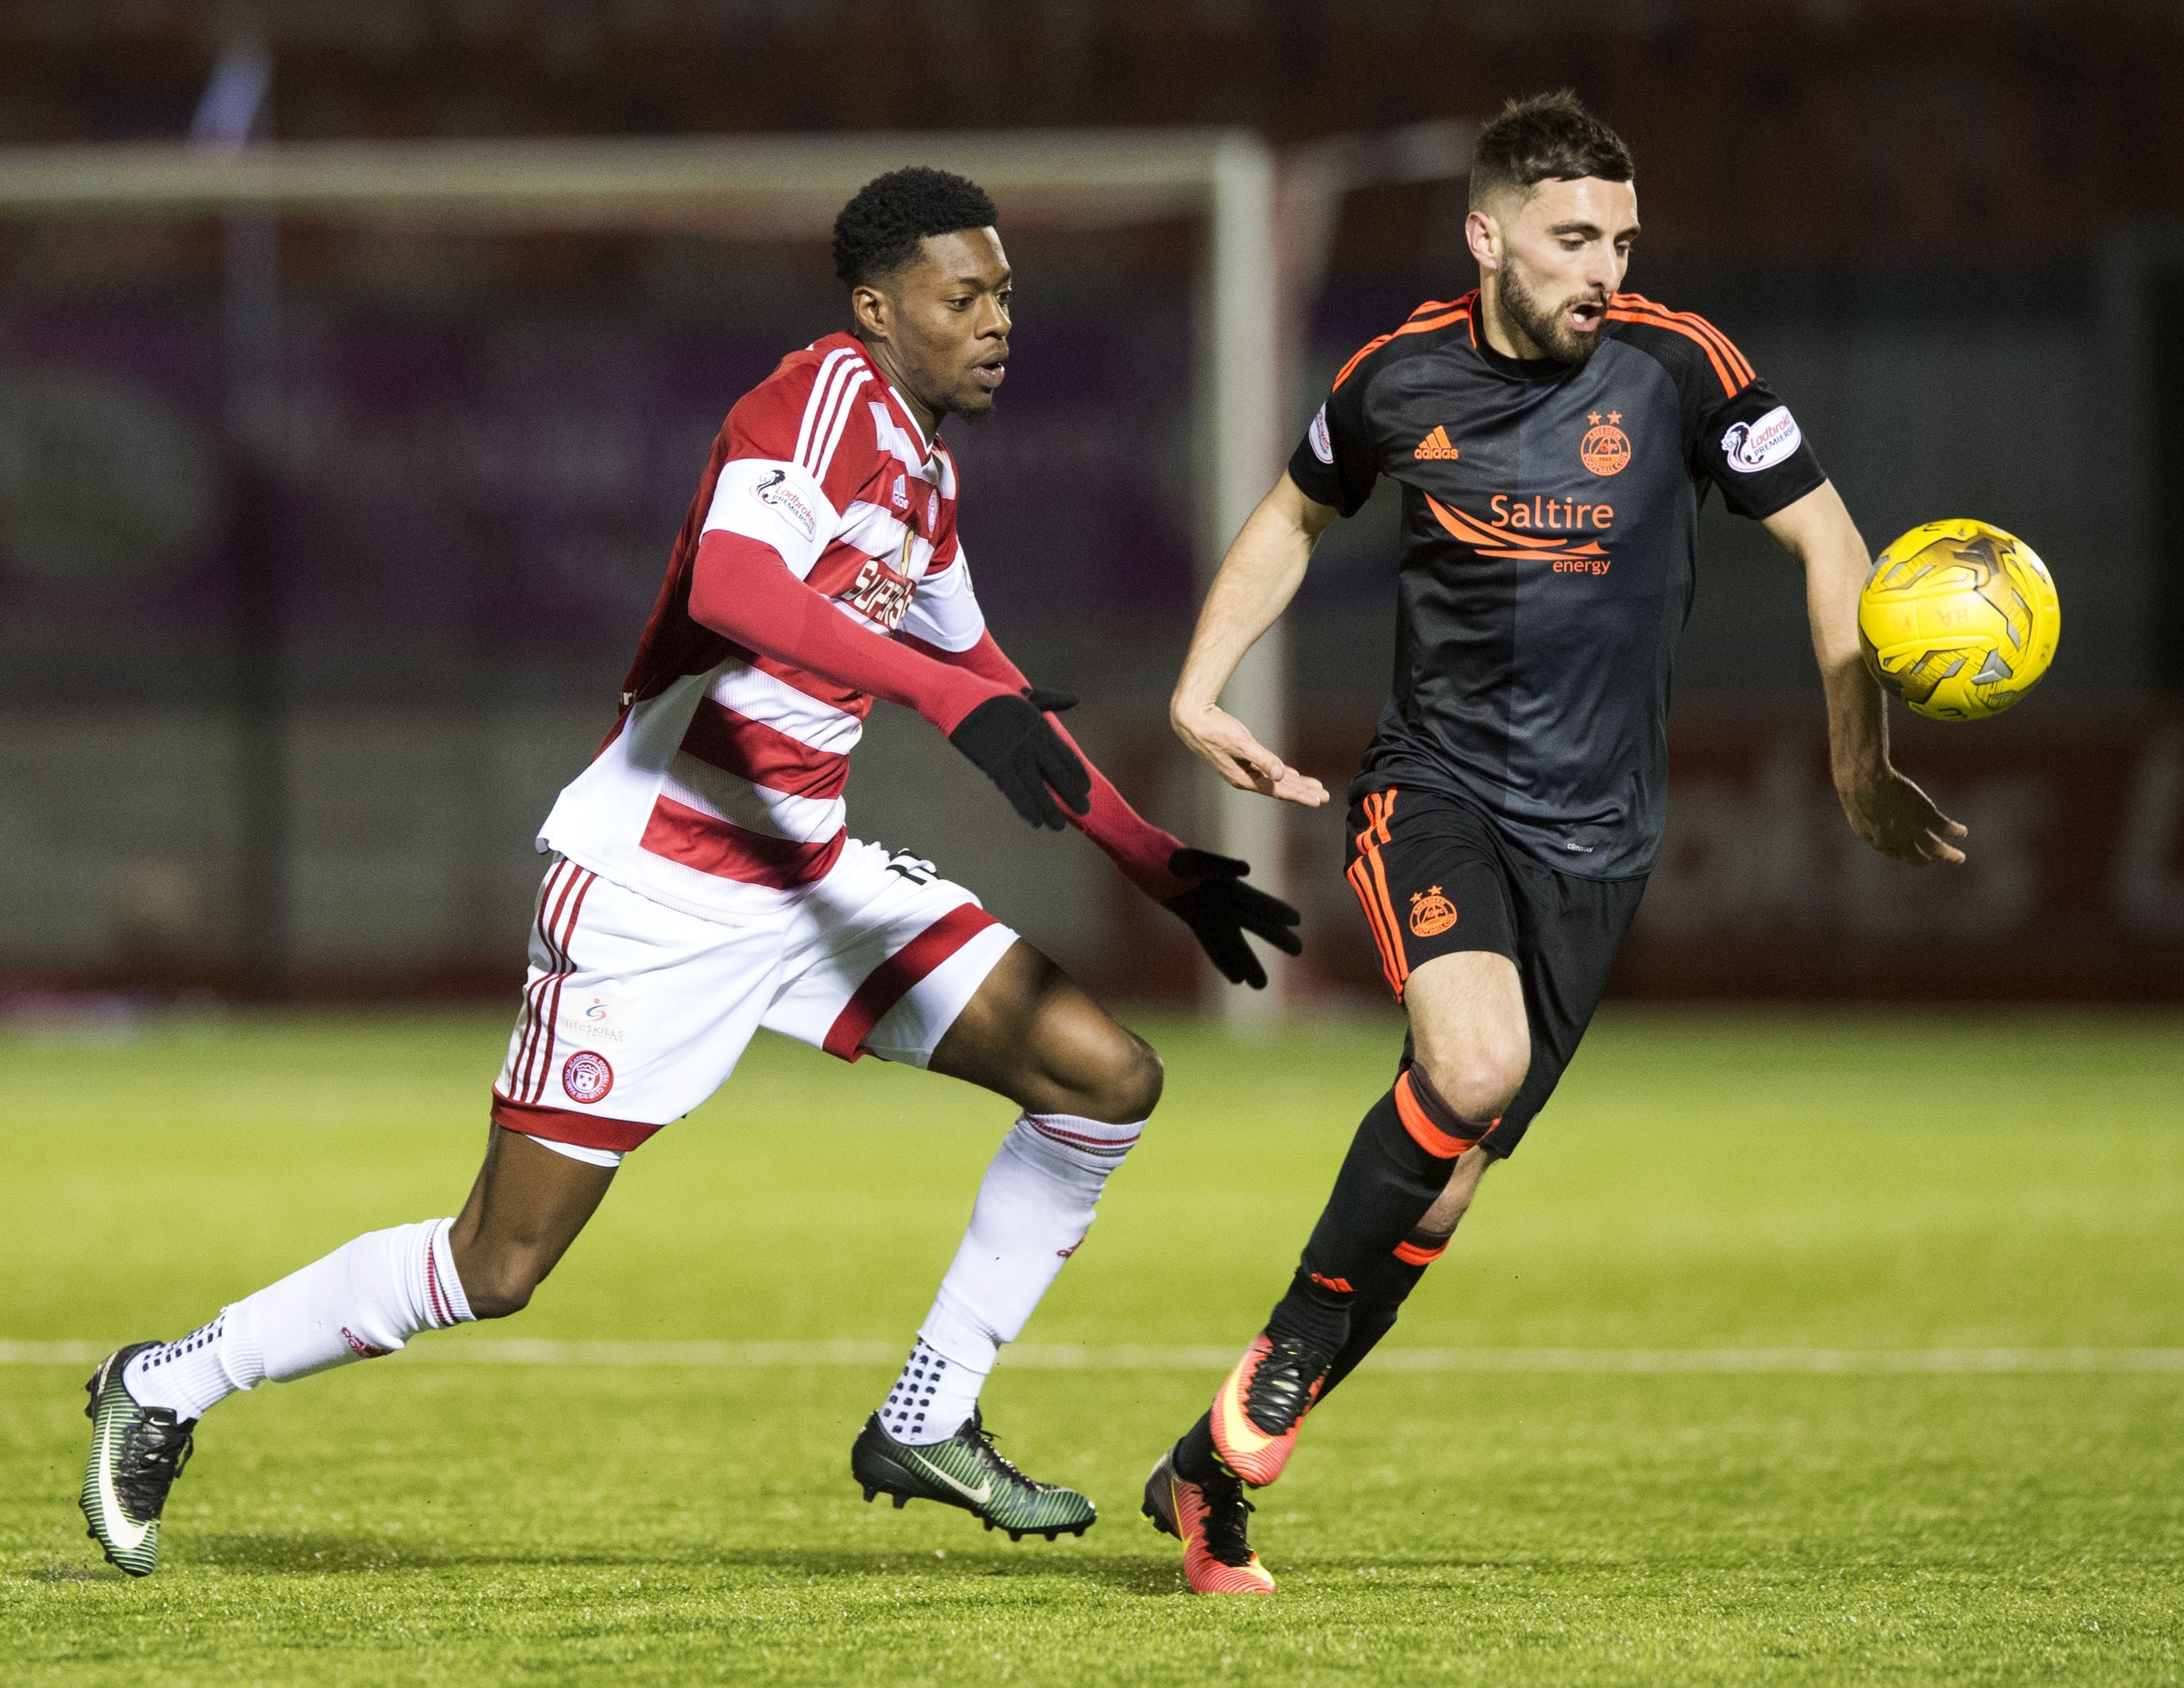 Aberdeen's Graeme Shinnie (R) in action in the 2016/17 away offering. Image: SNS.